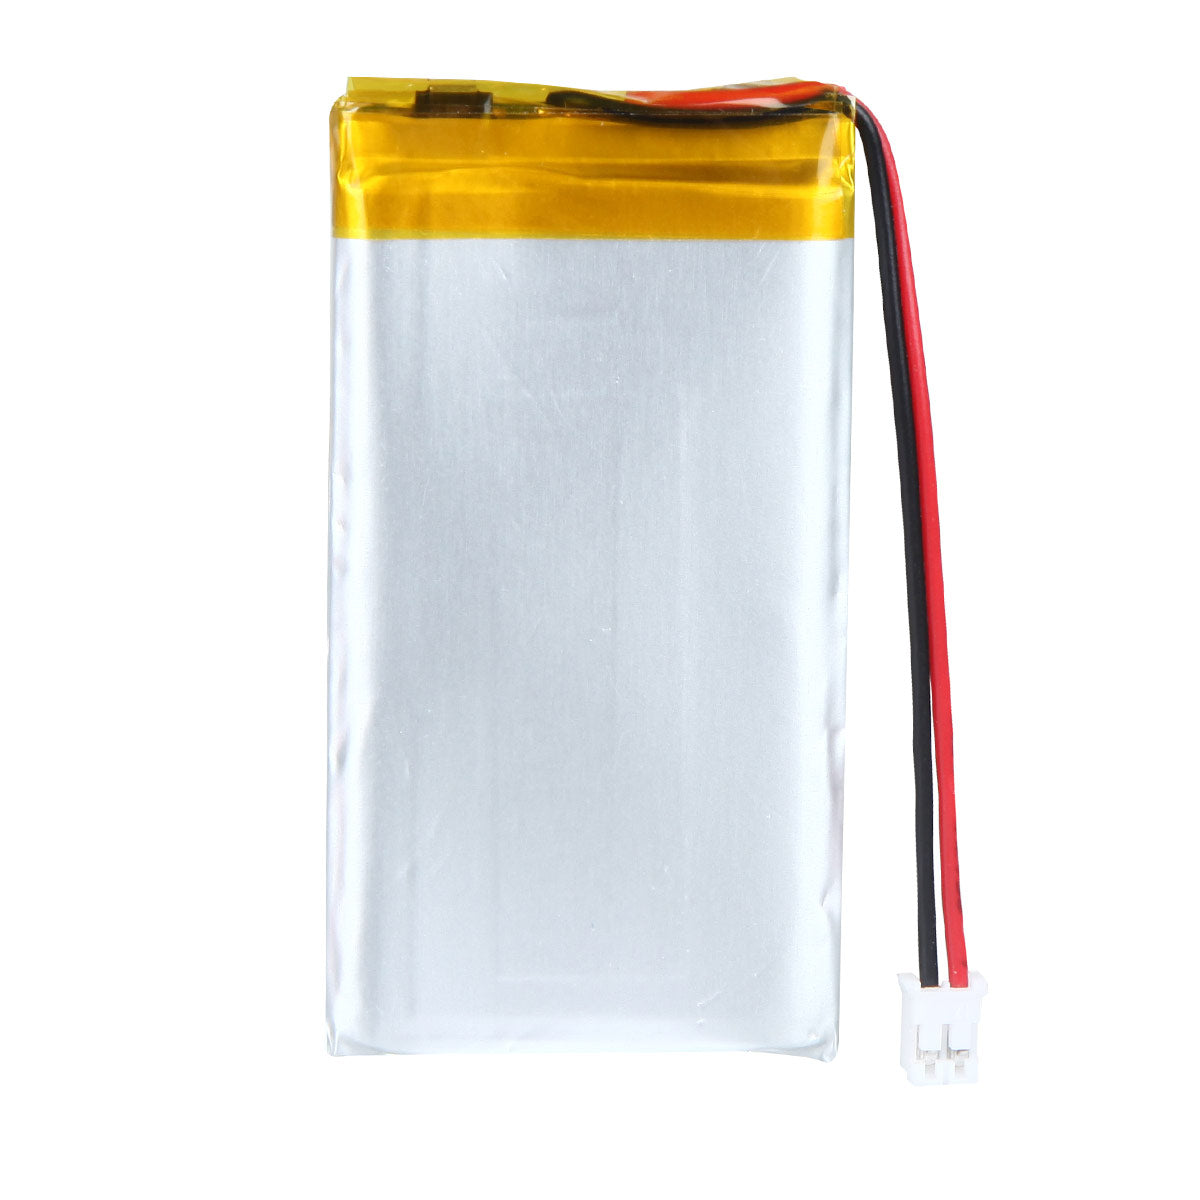 YDL 3.7V 1500mAh 623360 Rechargeable Lithium  Polymer Battery